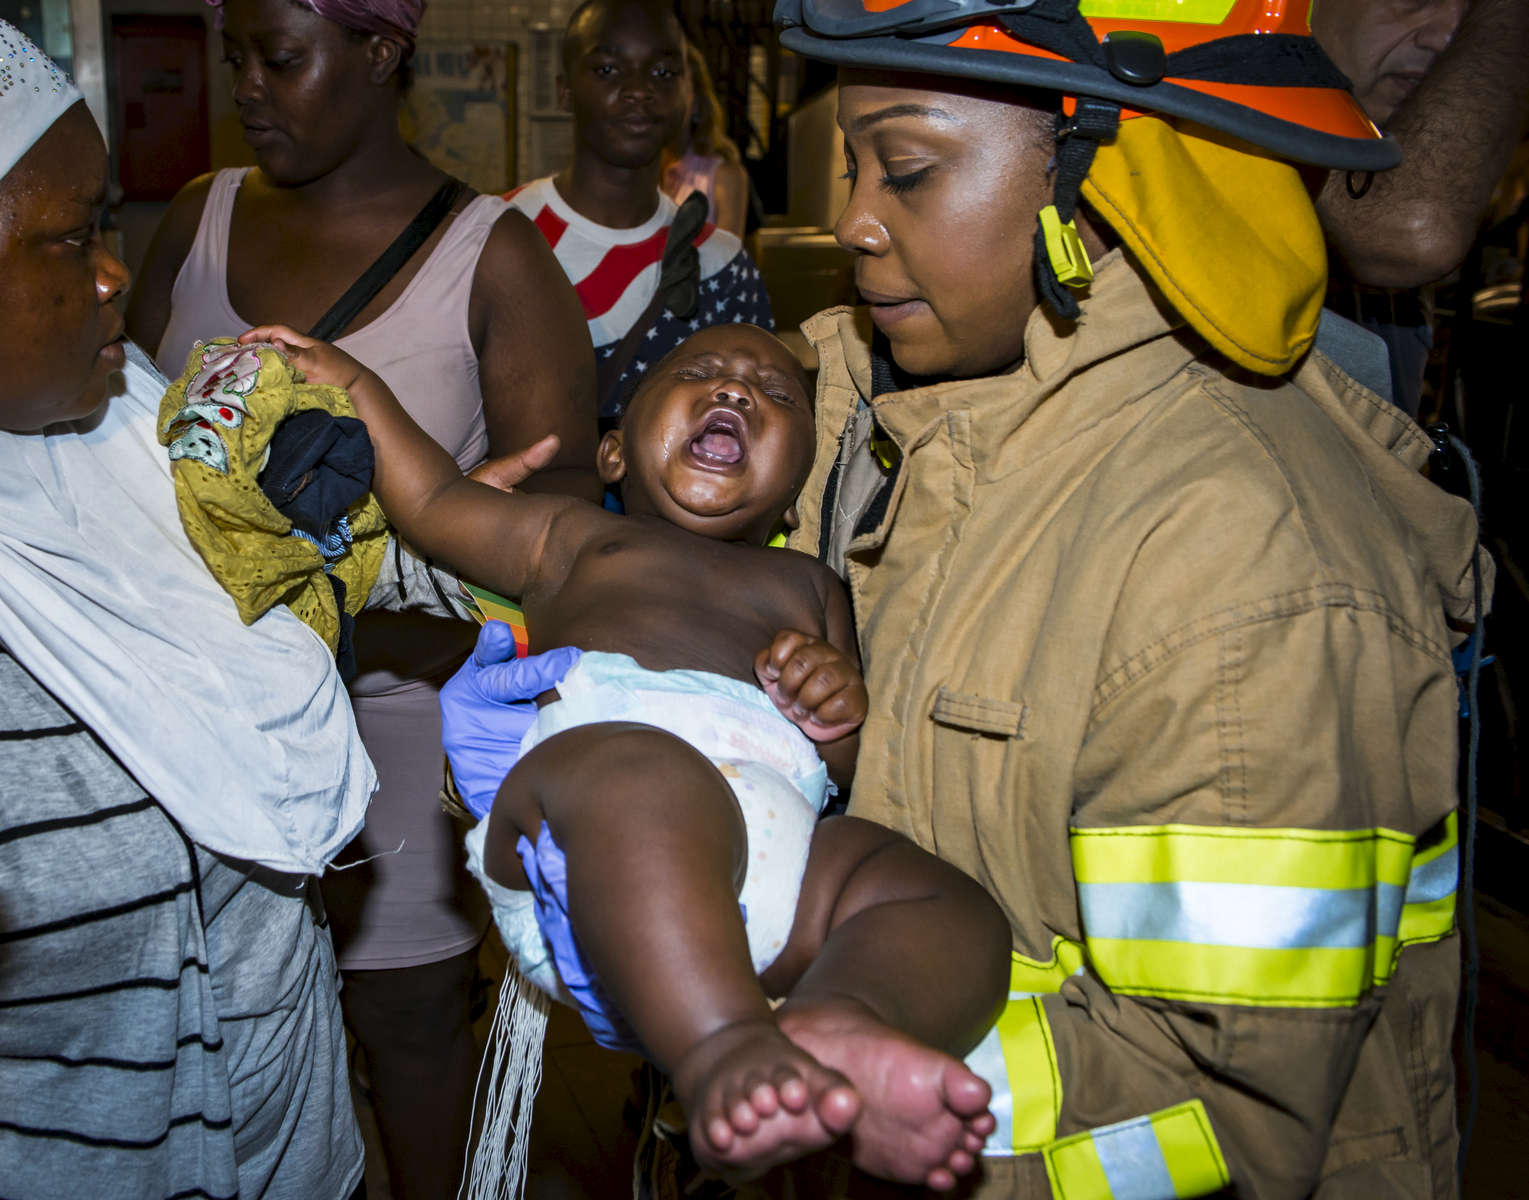 Emergency Medical Technician Tuanika Brown rescues a baby after a train derailment at St. Nicholas Avenue and West 135th Street in Harlem on Tuesday, June 27, 2017. Hundreds of people were evacuated and thirty four straphangers suffered non-life-threatening injuries.  